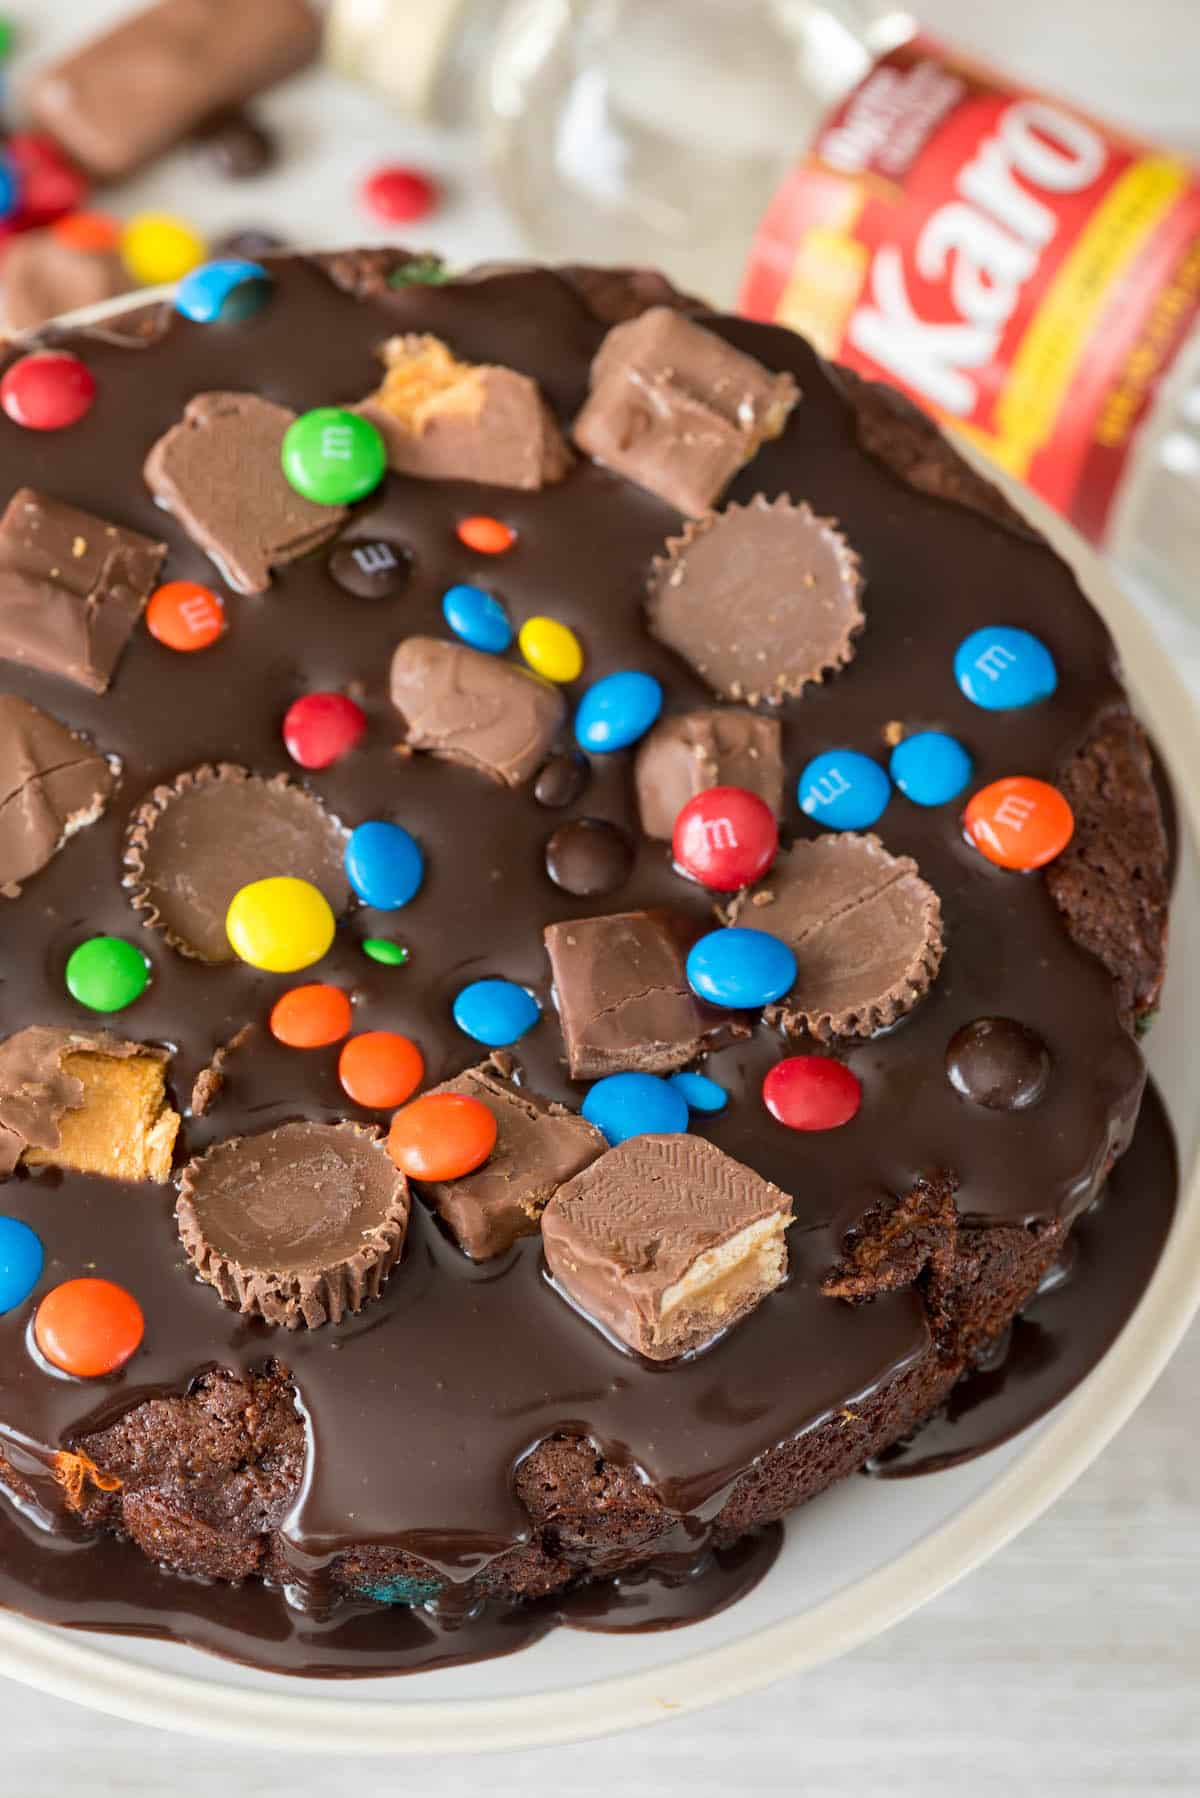 cake with m&ms and peanut butter cups baked in on top sitting on a white platter